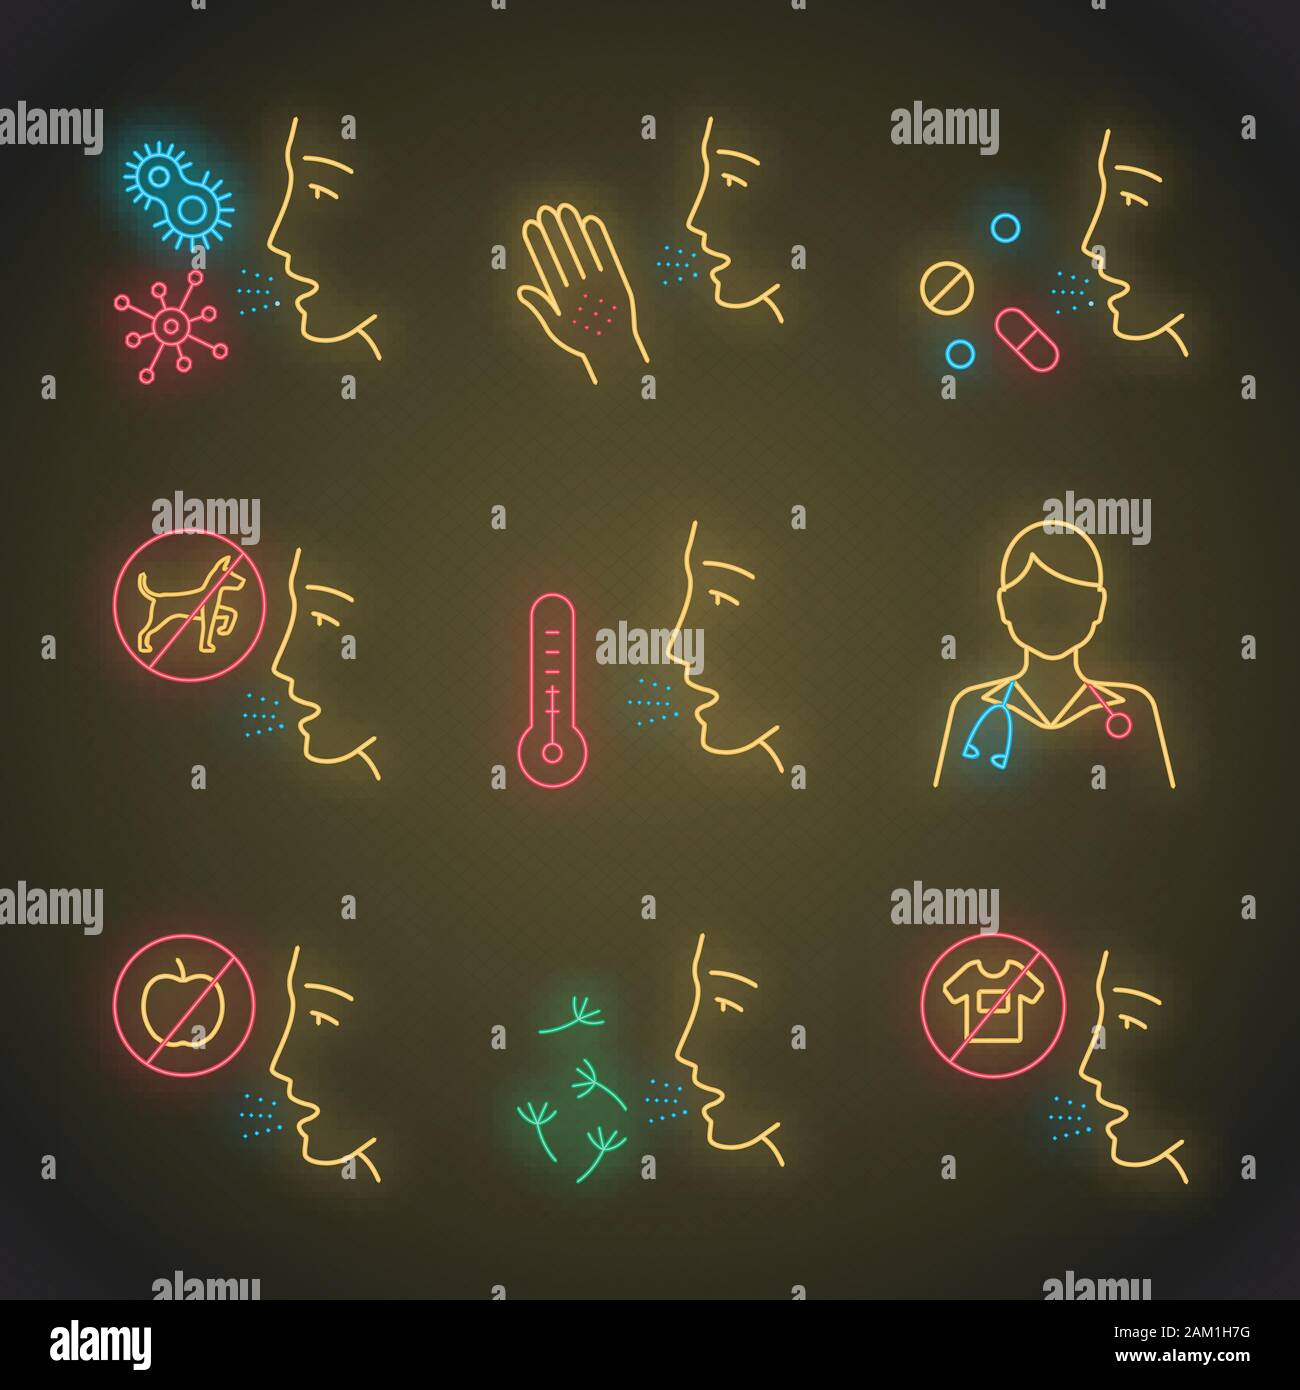 Allergies app icons set. Contact, food, respiratory diseases. Allergen sources. Diagnosis, medication. Medical problem. UI/UX user interface. Web or m Stock Vector